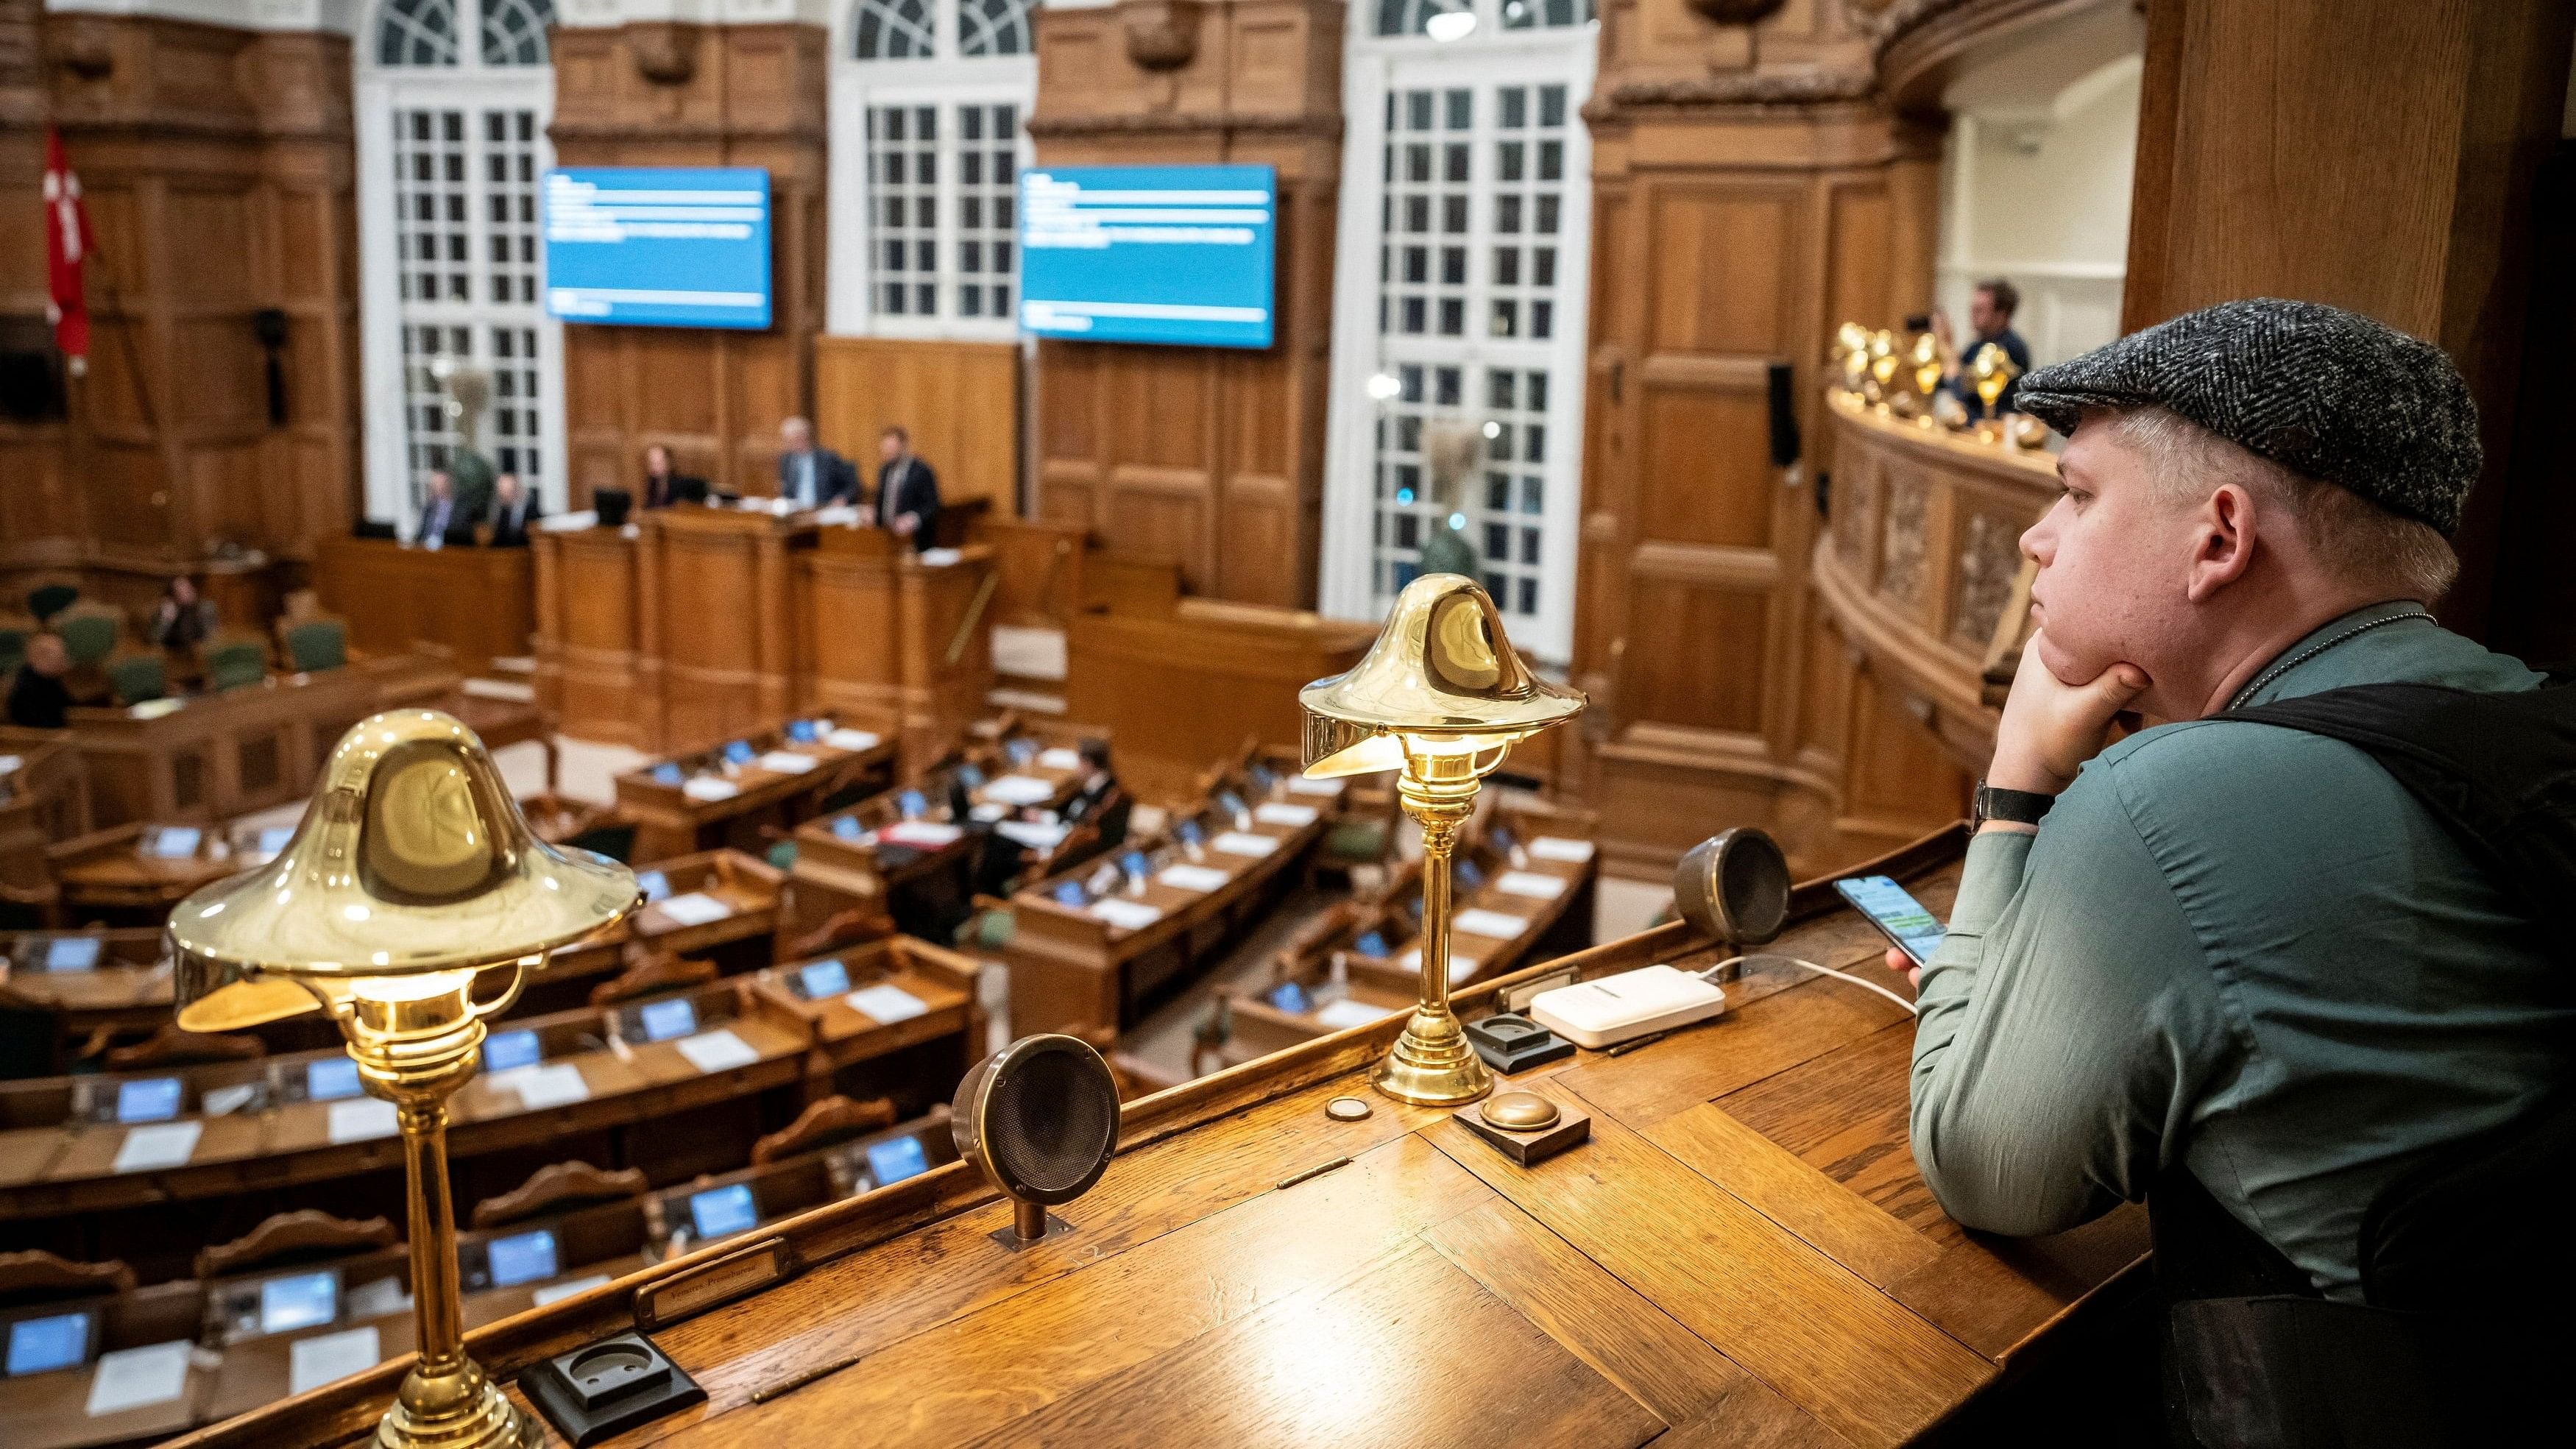 <div class="paragraphs"><p>Rasmus Paludan, leader of the right-wing political party Stram Kurs, listens from the press seats during a meeting in the Danish Parliament for the first reading of a proposed bill that would make it illegal to burn copies of the Koran in public places, at Christiansborg Castle in Copenhagen, Denmark.&nbsp;</p></div>